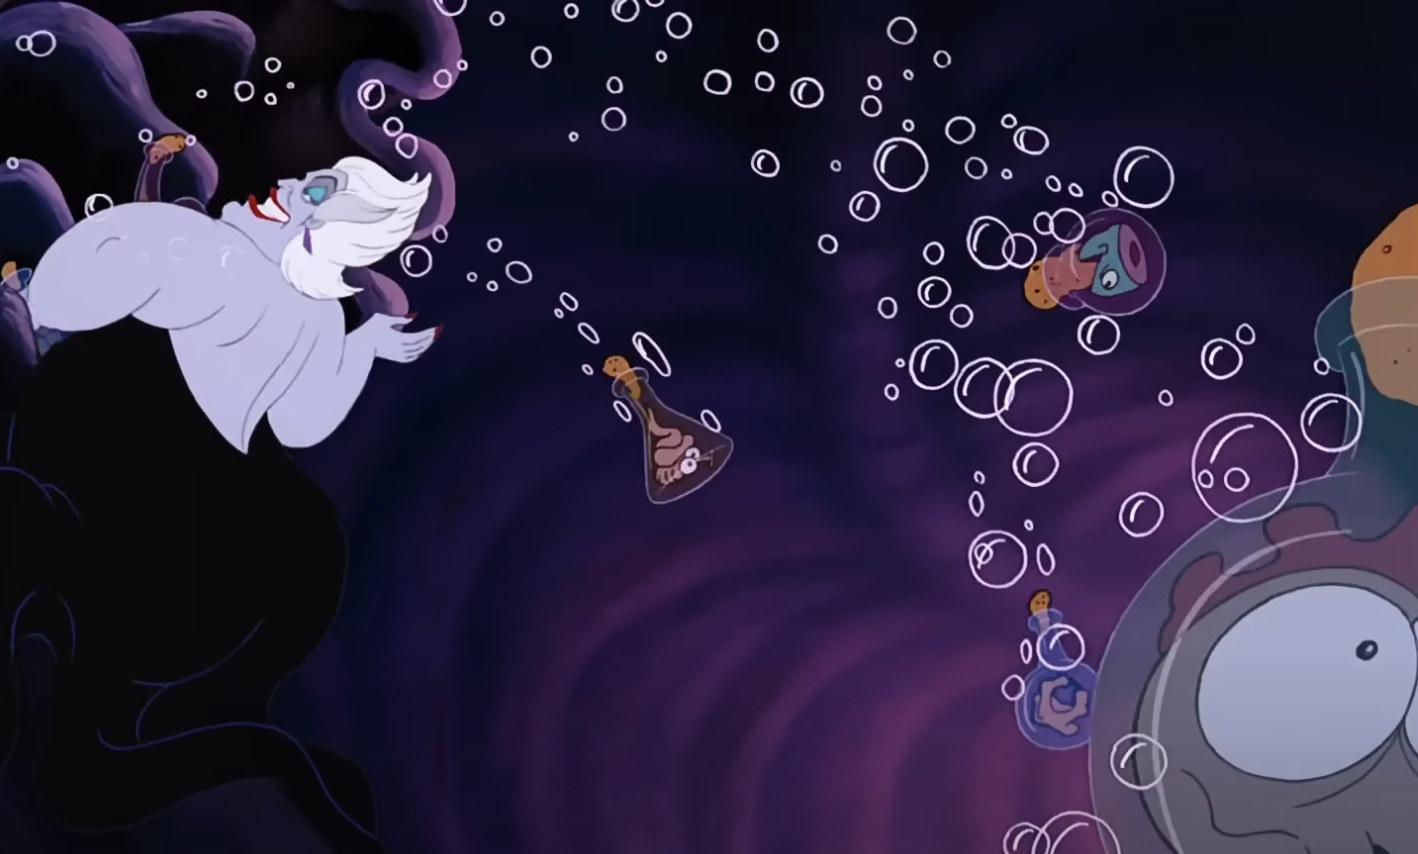 Ursula throwing things and causing bubbles to form